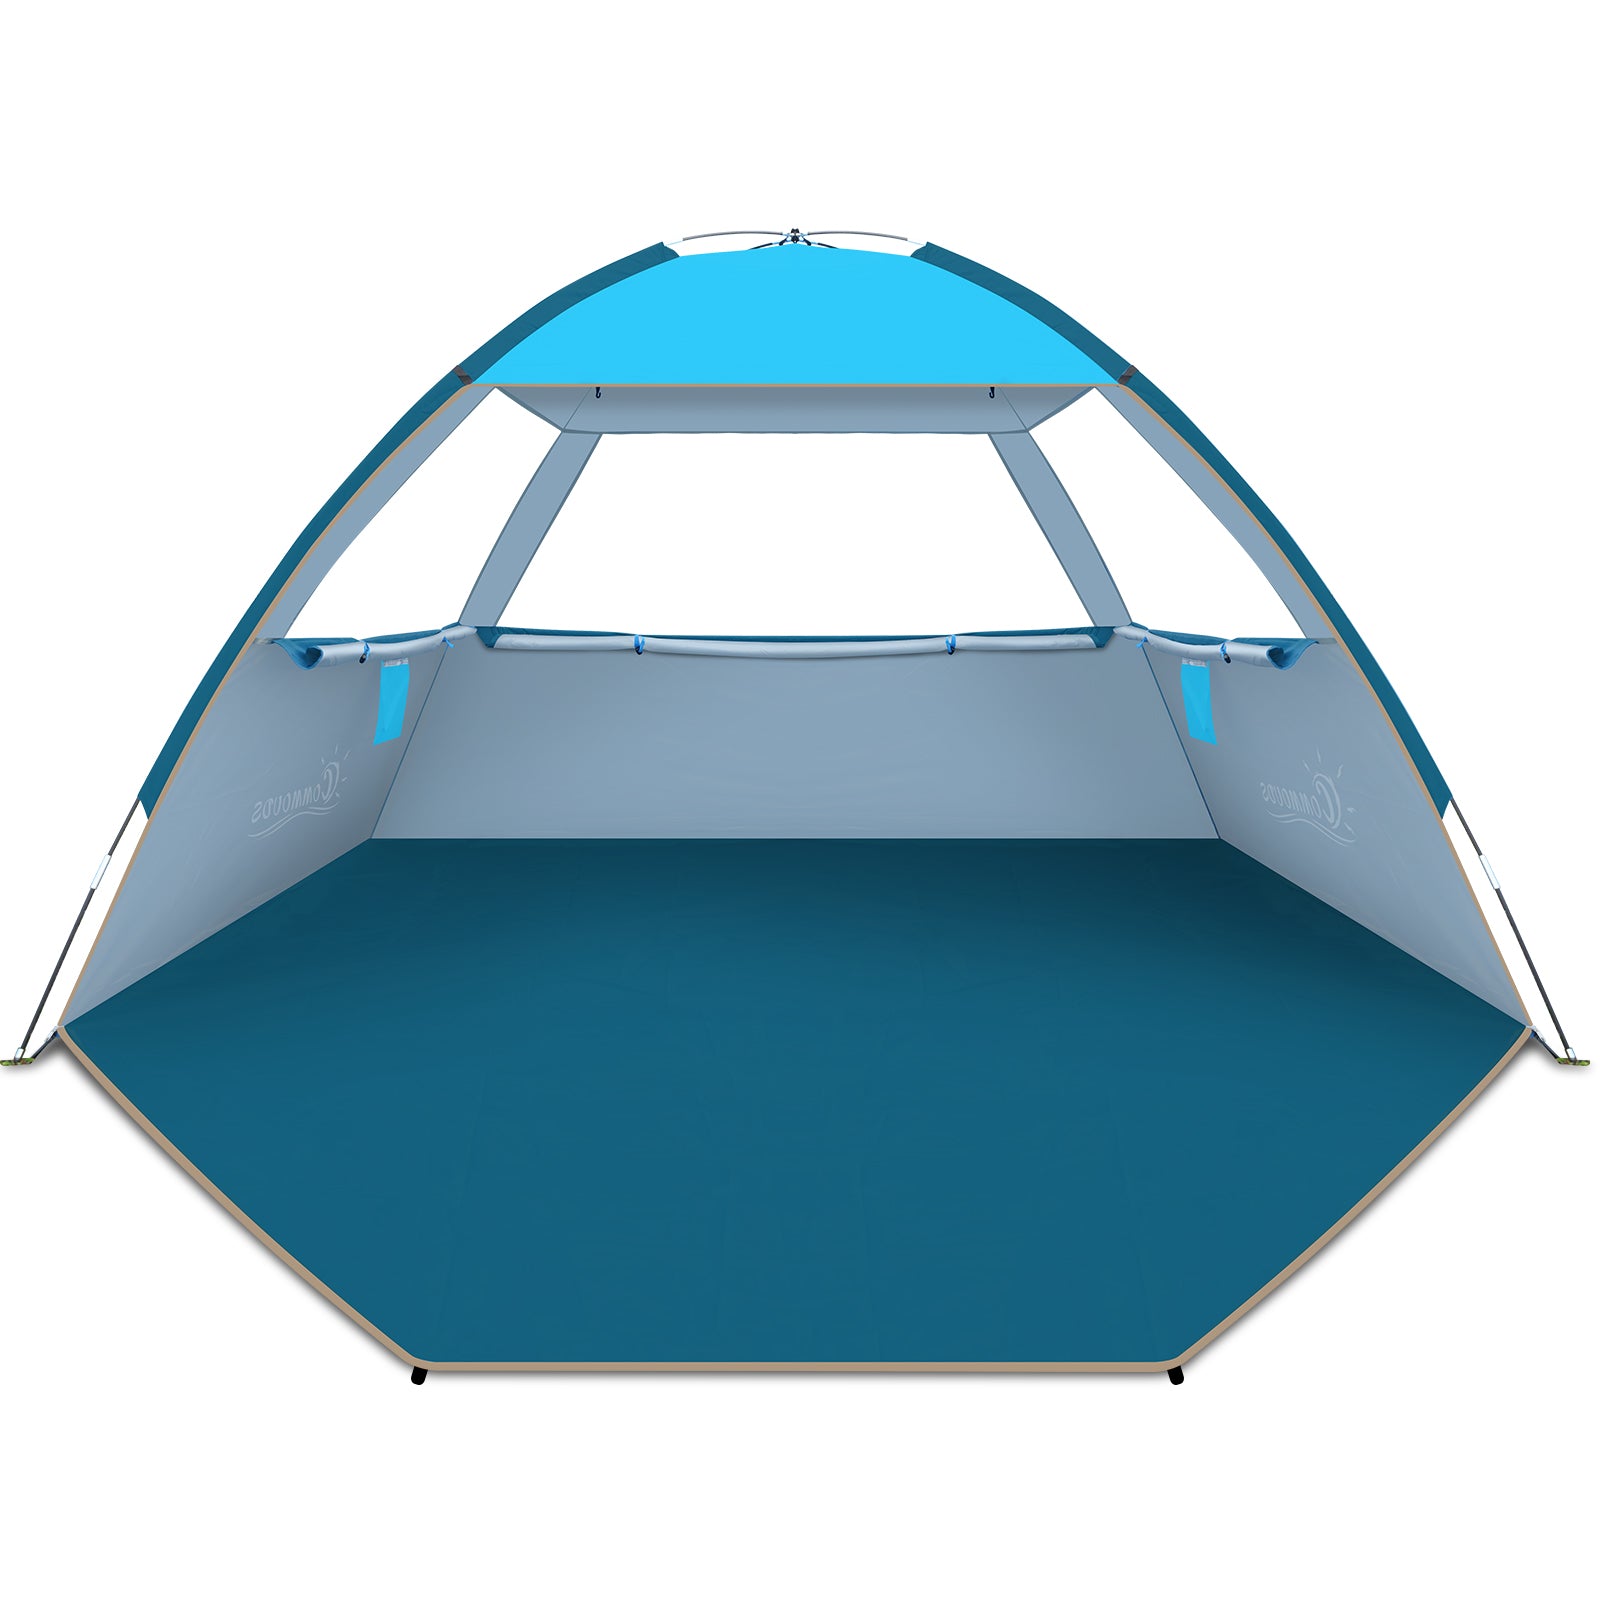 COMMOUDS Beach Tent Sun Shade for 6-8 Person, UPF 50+ Beach Sun Shelter Canopy Tent, Lightweight, Easy Set Up and Carry (Sky Blue)